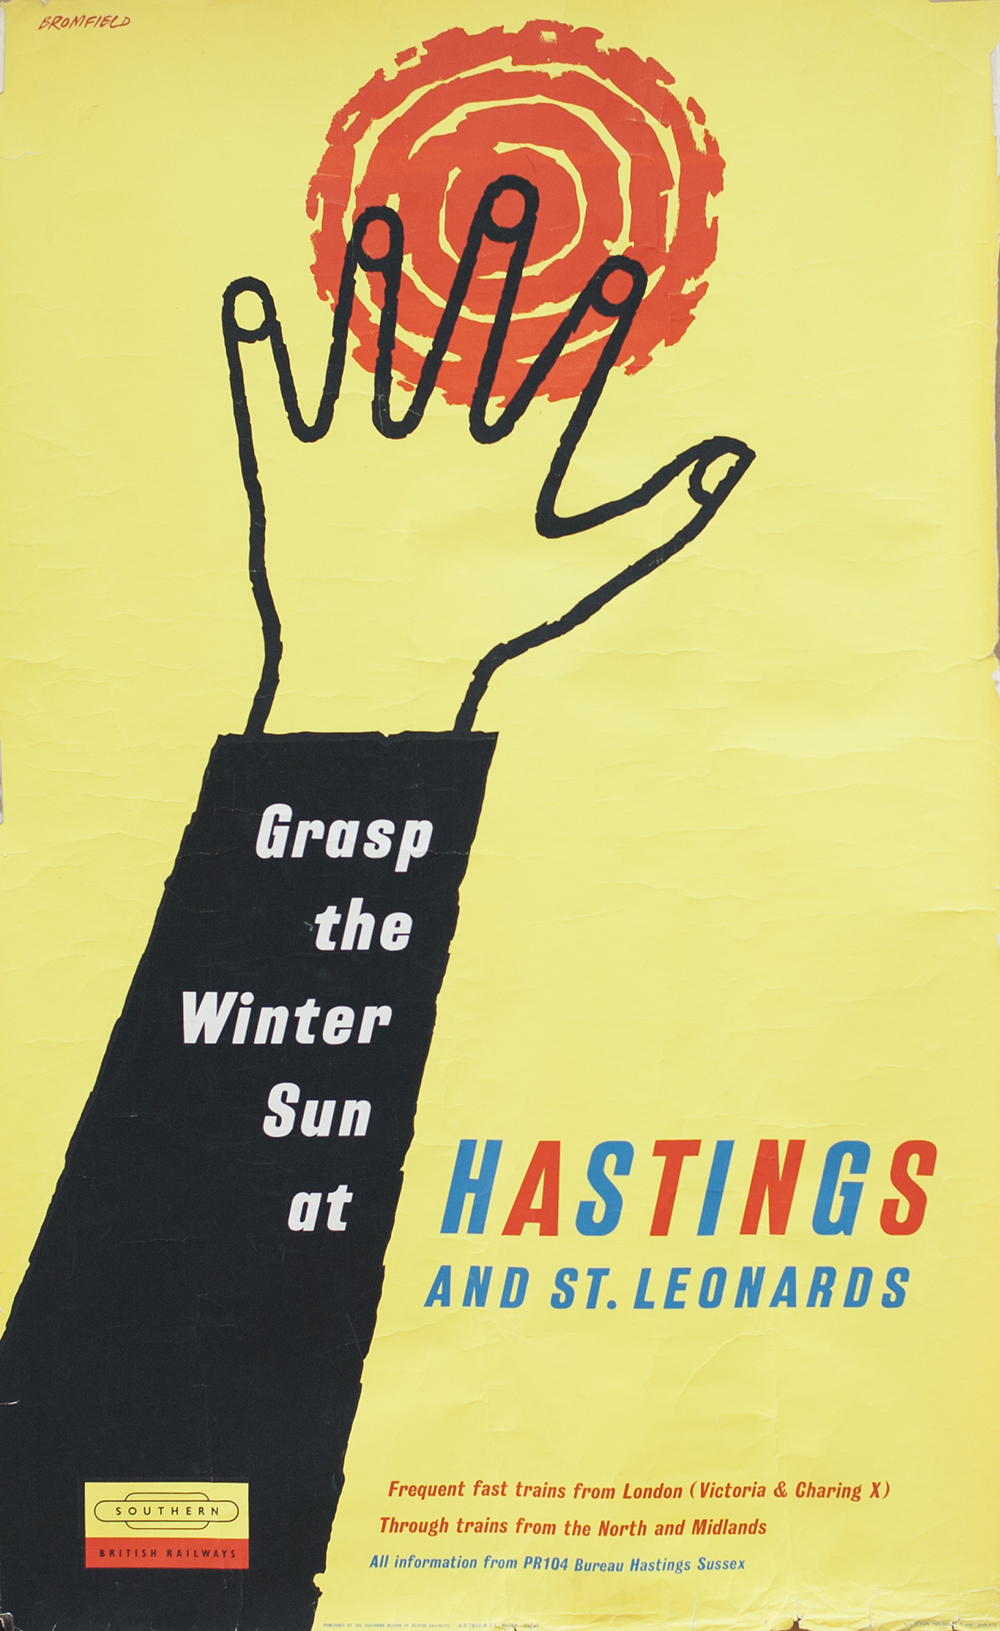 Poster BR(S) GRASP THE WINTER SUN AT HASTINGS AND ST LEONARDS. Double Royal 25in x 40in. In good